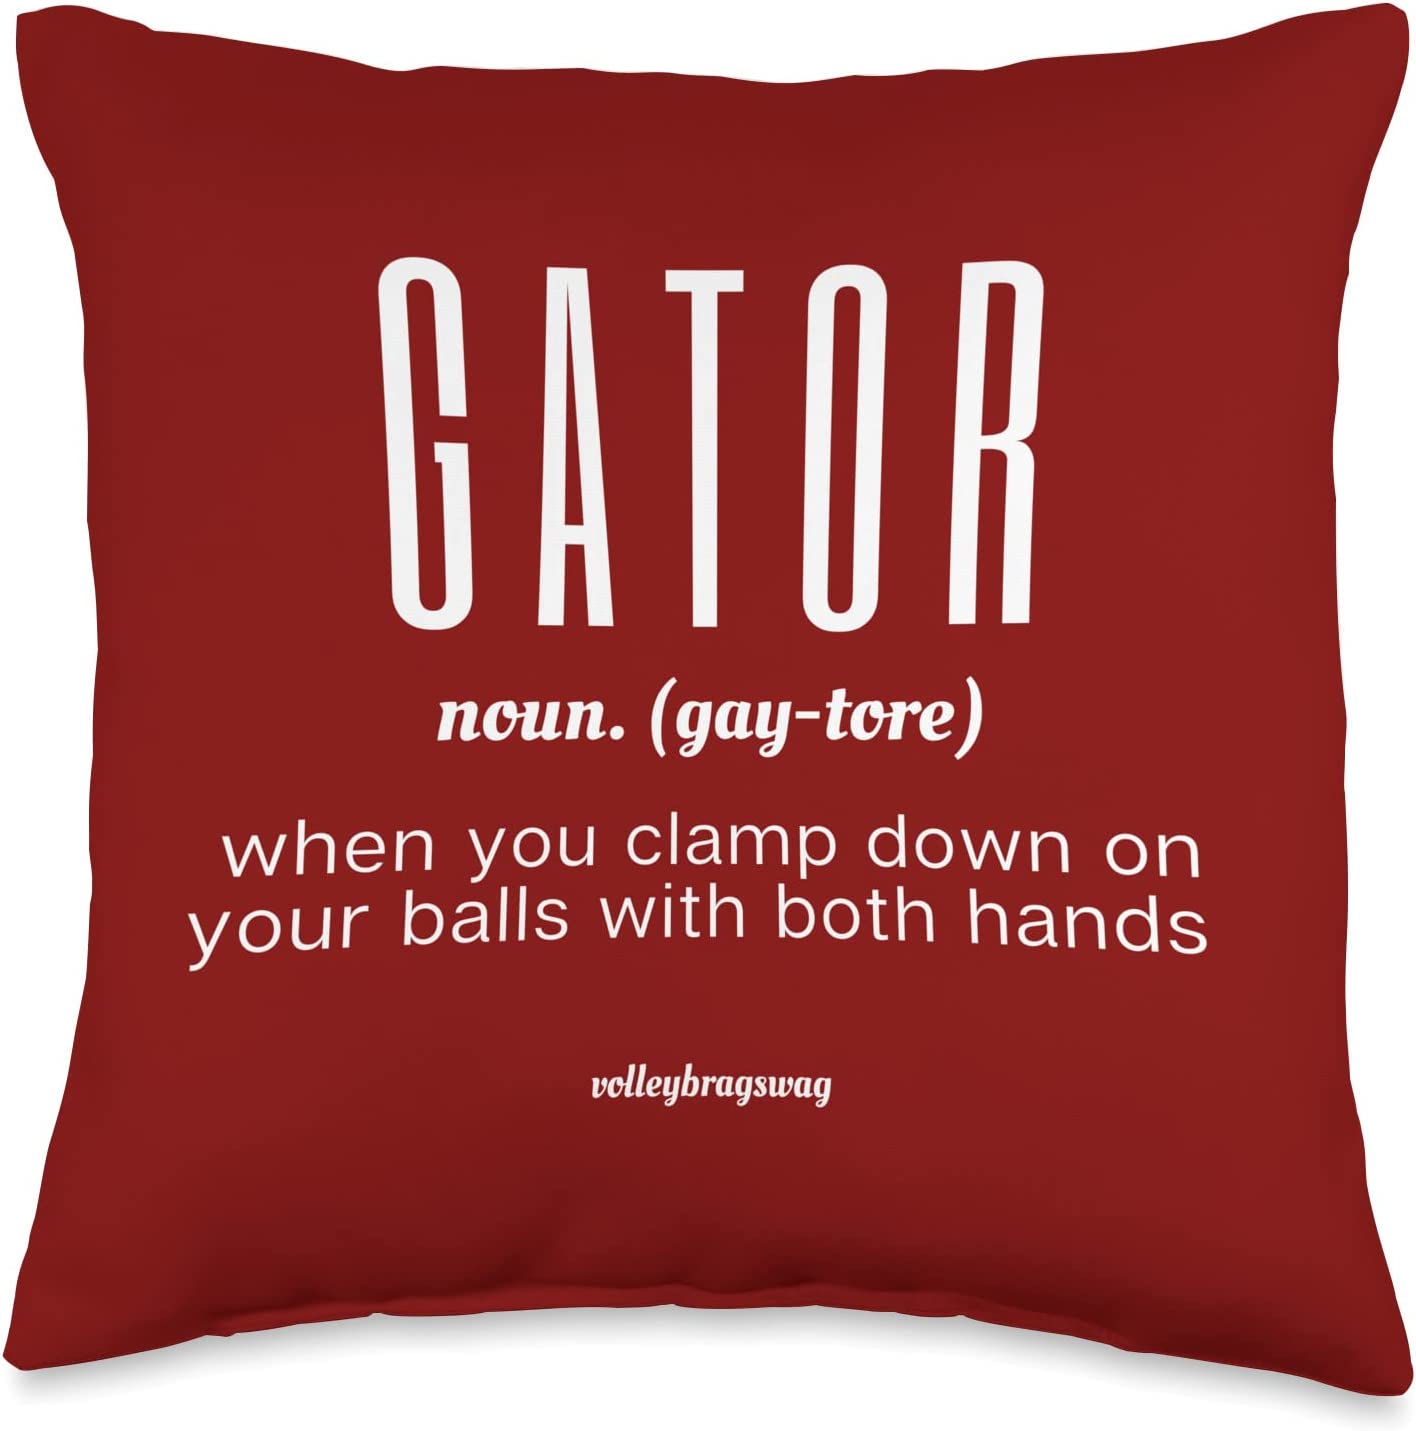 Funny Volleyball T-Shirts and Pillows Feature Dig Volleyball Quotes Like Gator: When You Clamp Down On Your Balls With Both Hands